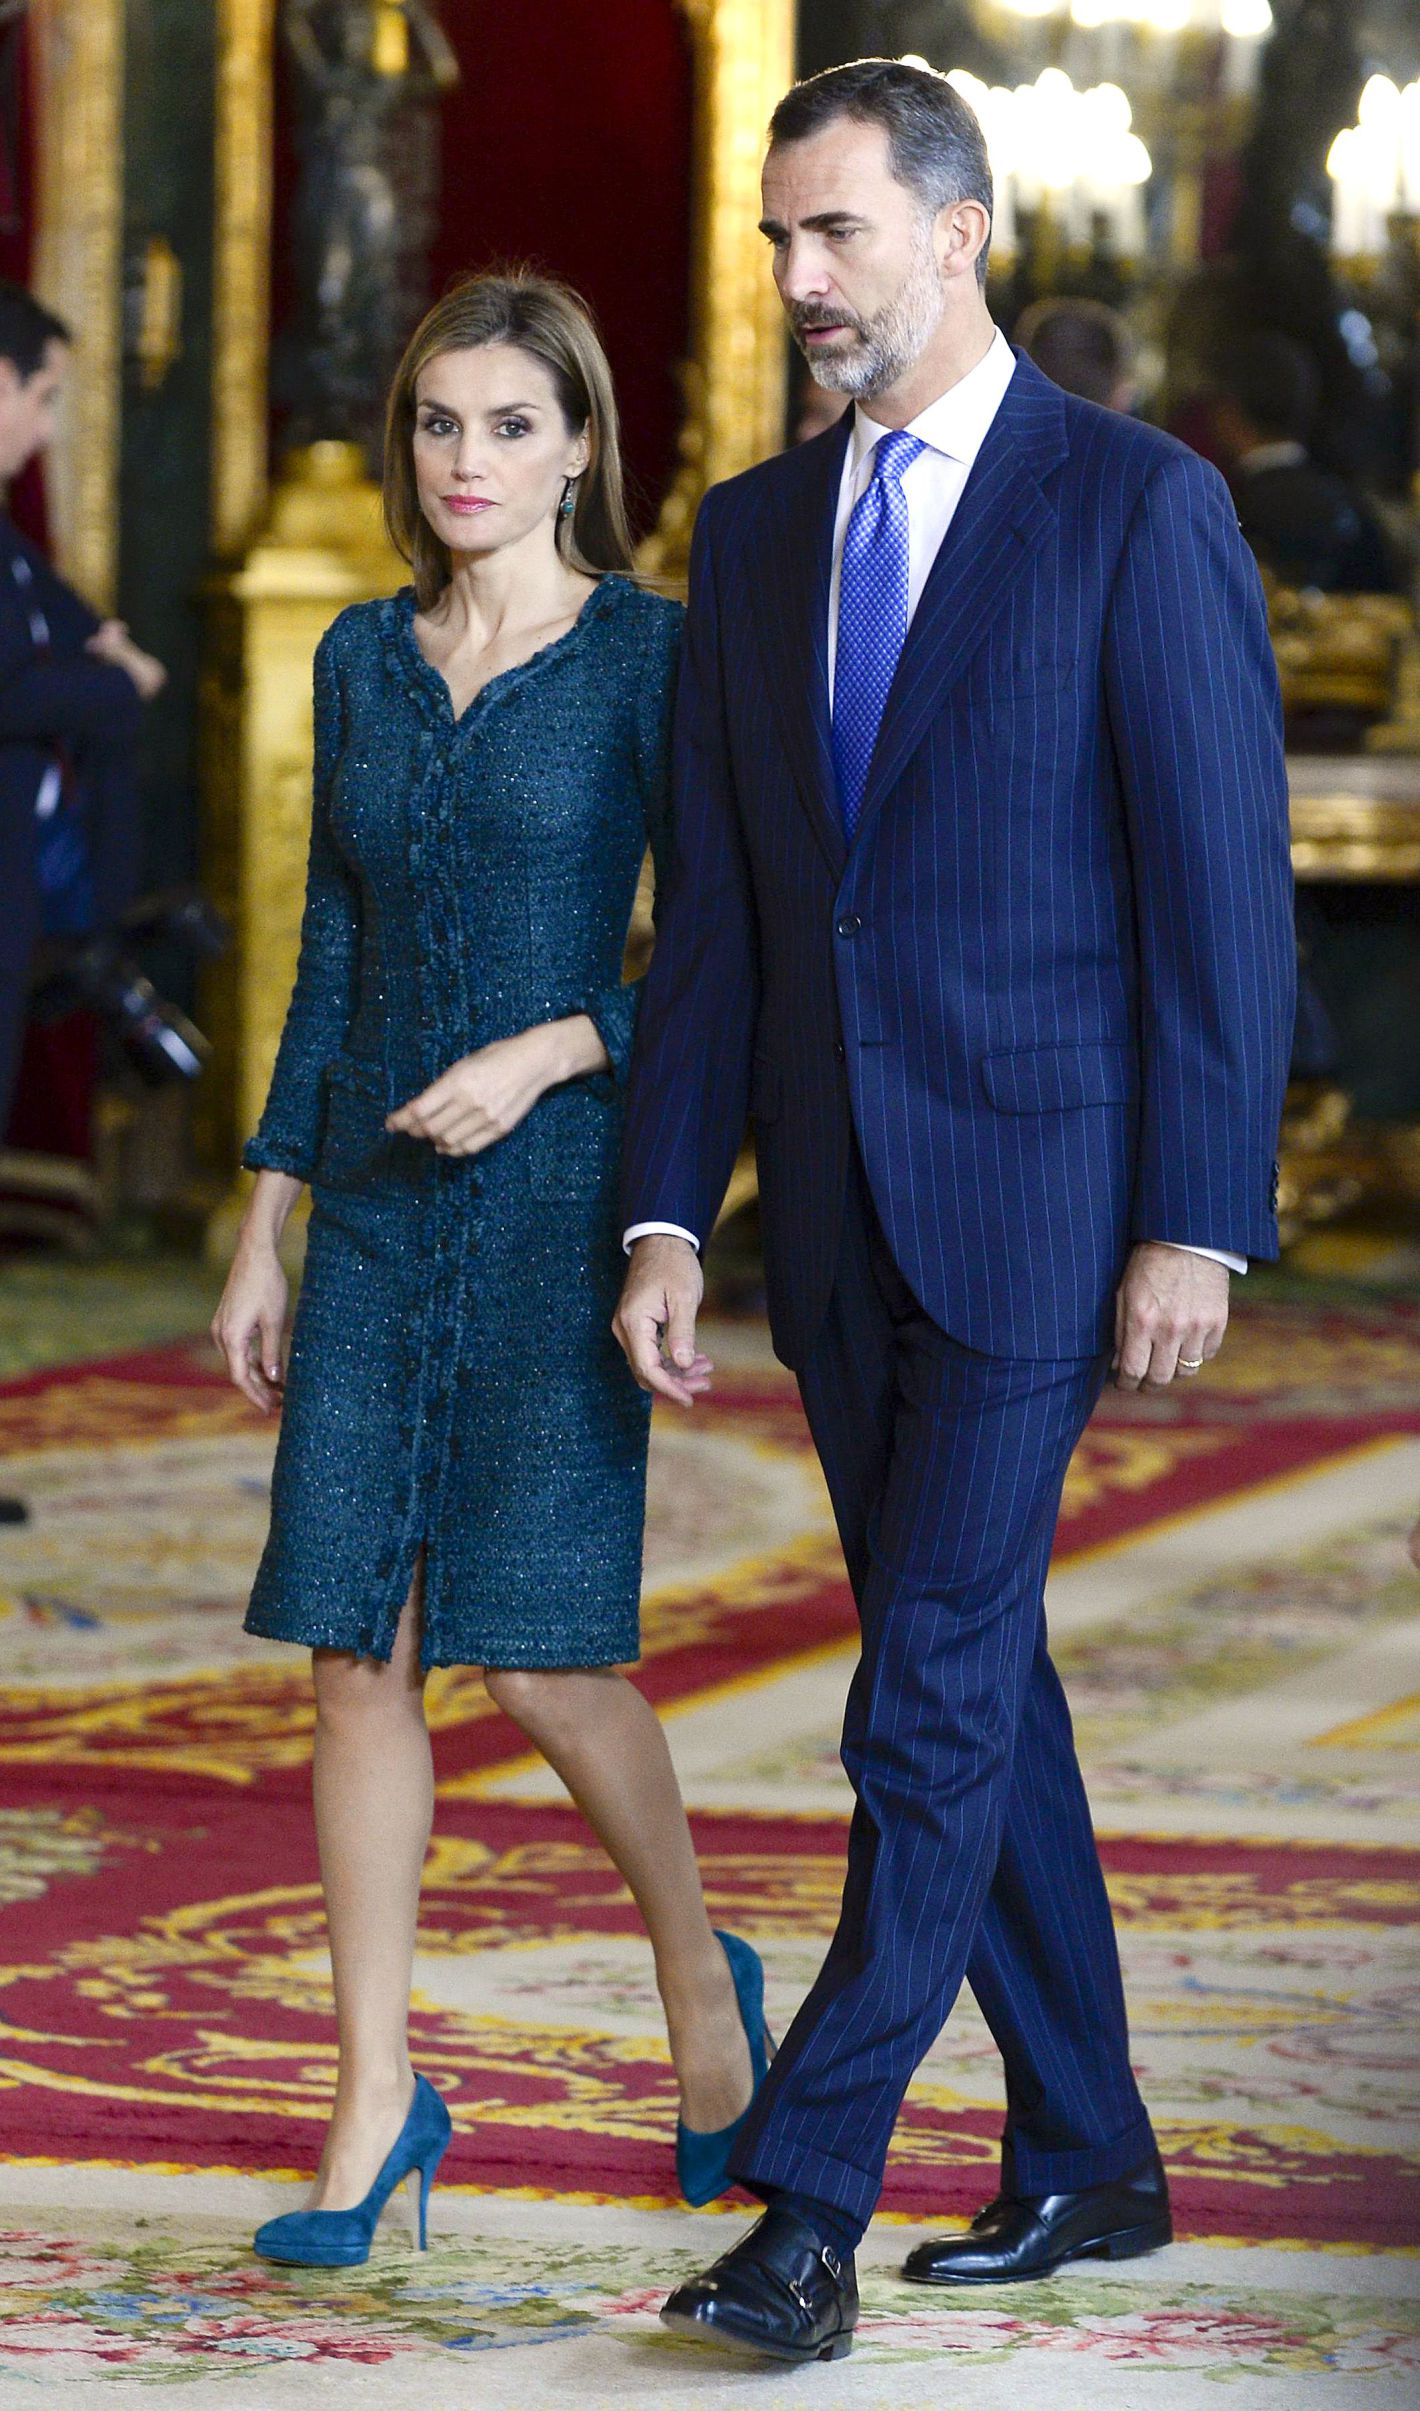 Mandatory Credit: Photo by Unimedia Images/REX/Shutterstock (4198425e) Queen Letizia and King Felipe VI of Spain Spanish Royals attends the National Day Military Parade, Madrid, Spain - 12 Oct 2014